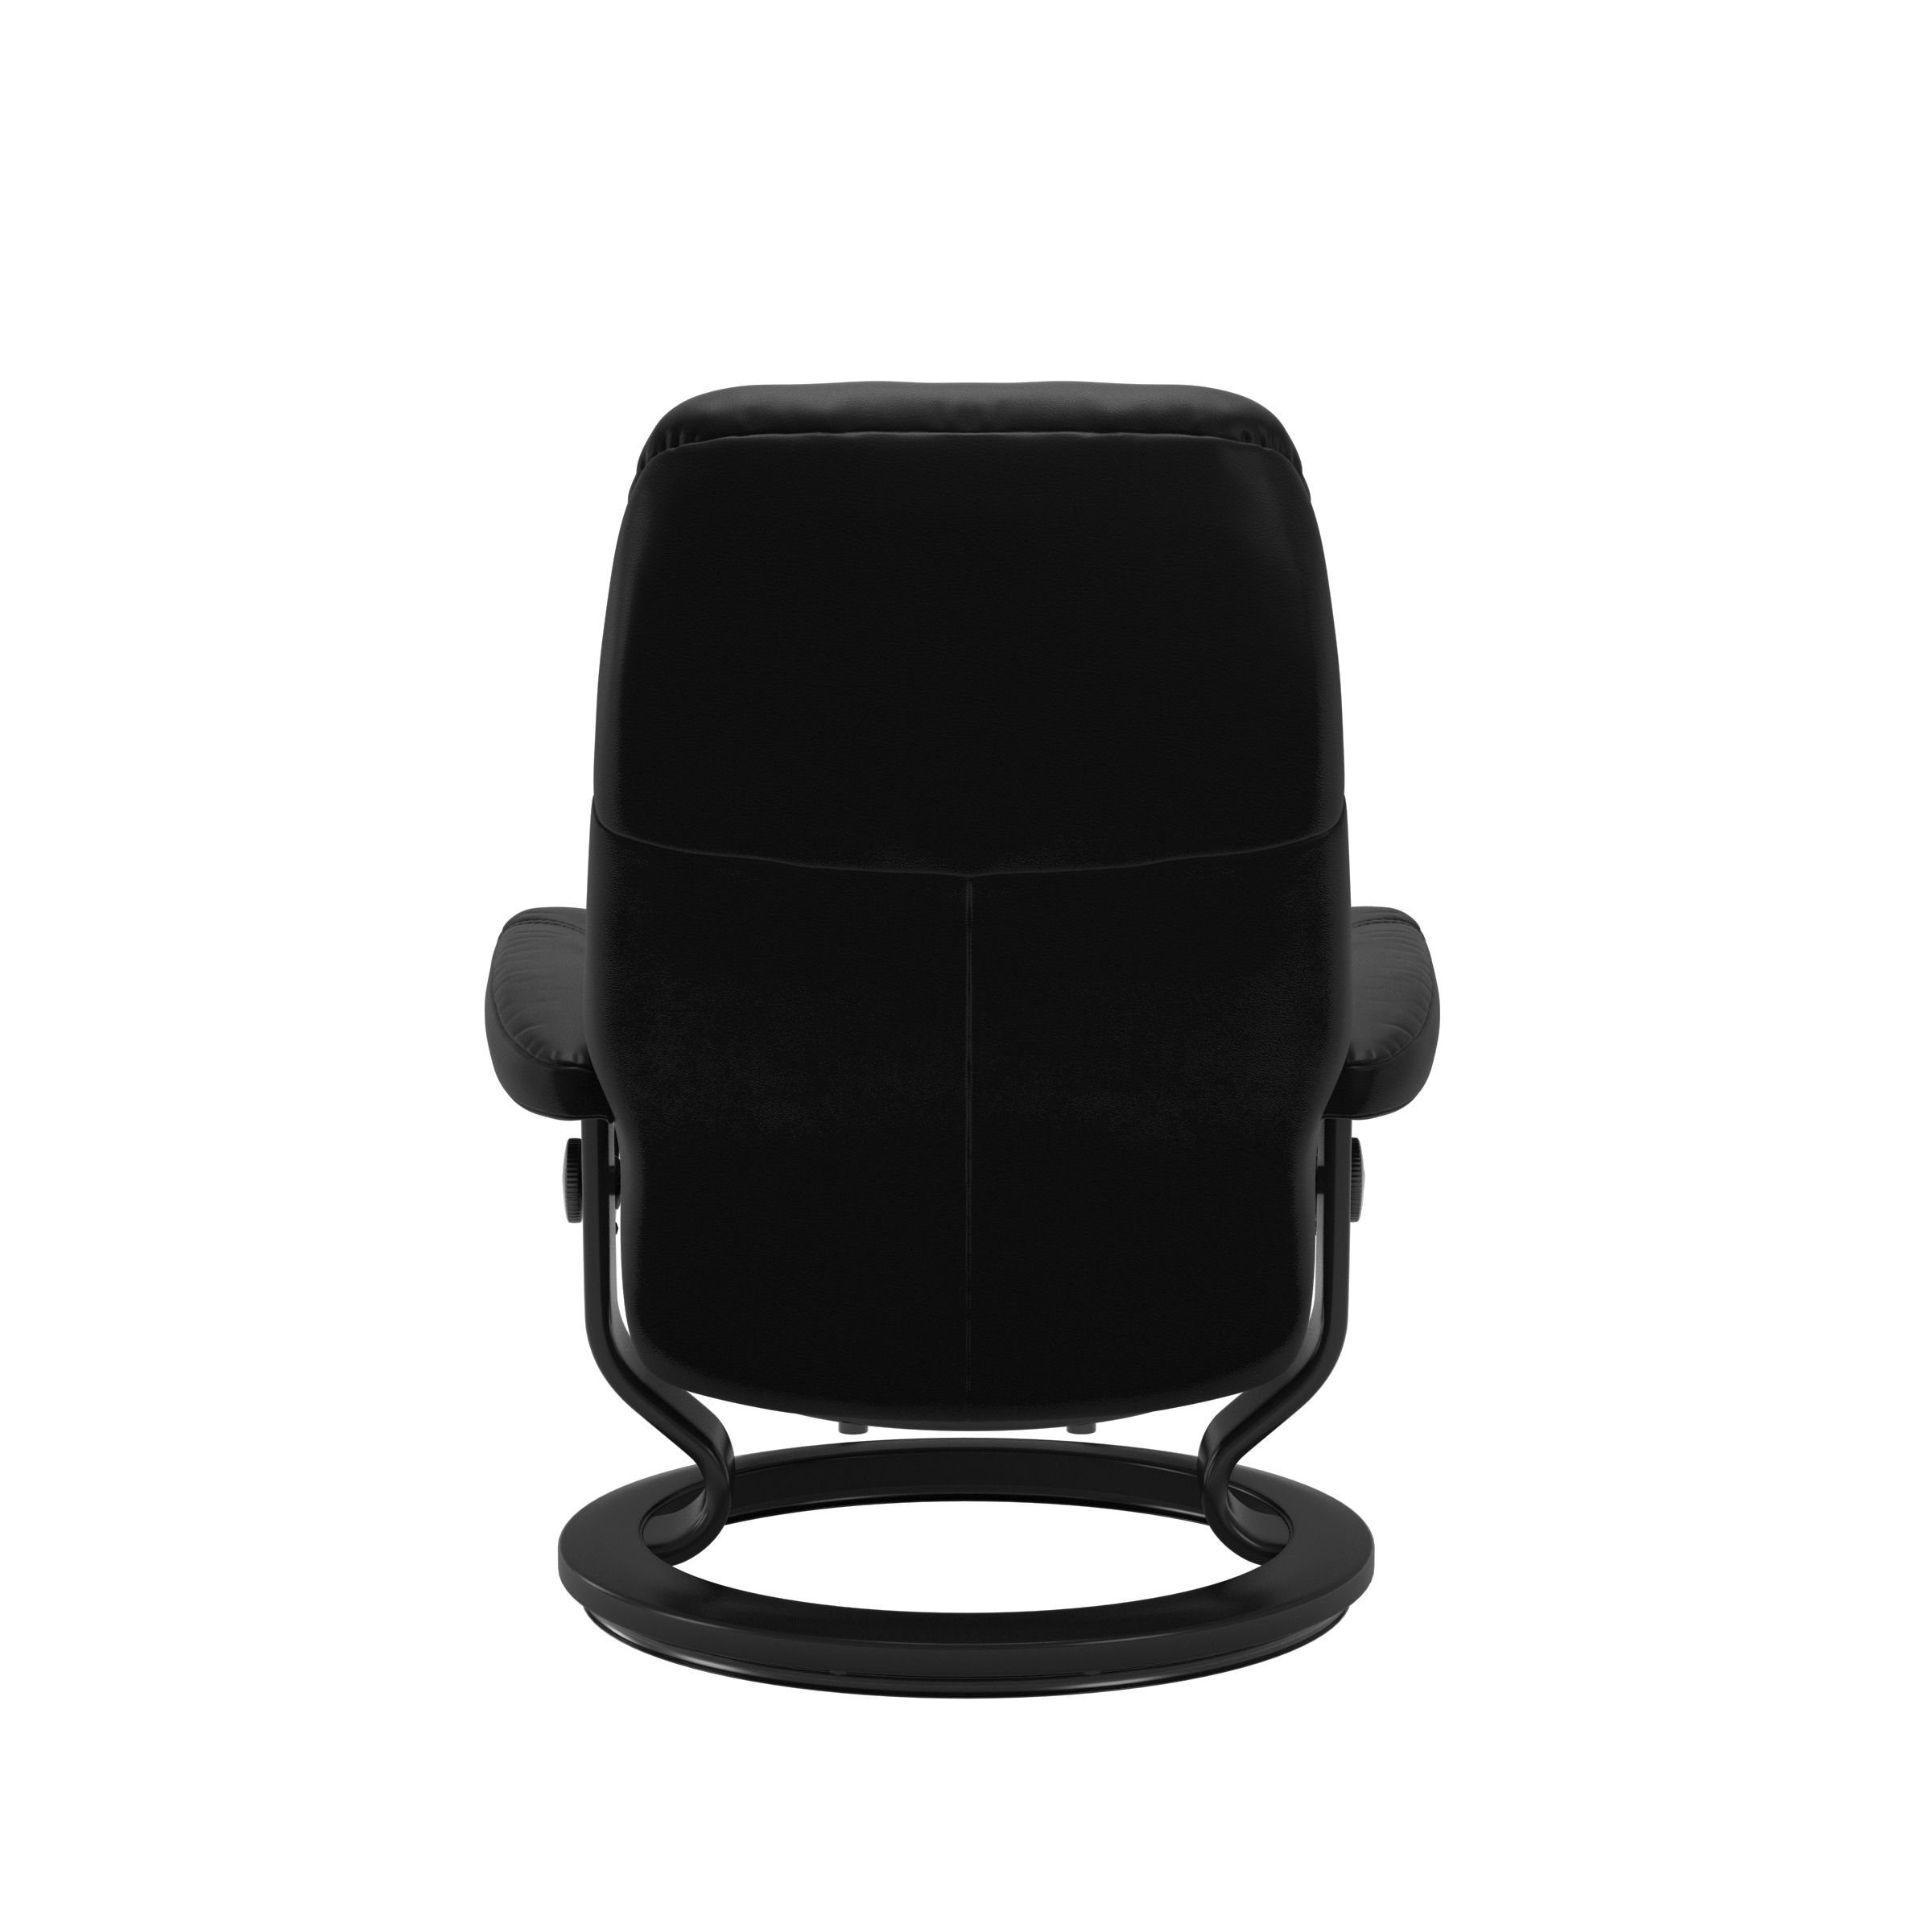 Europe Relaxsessel Classic, Consul Stressless® Made in